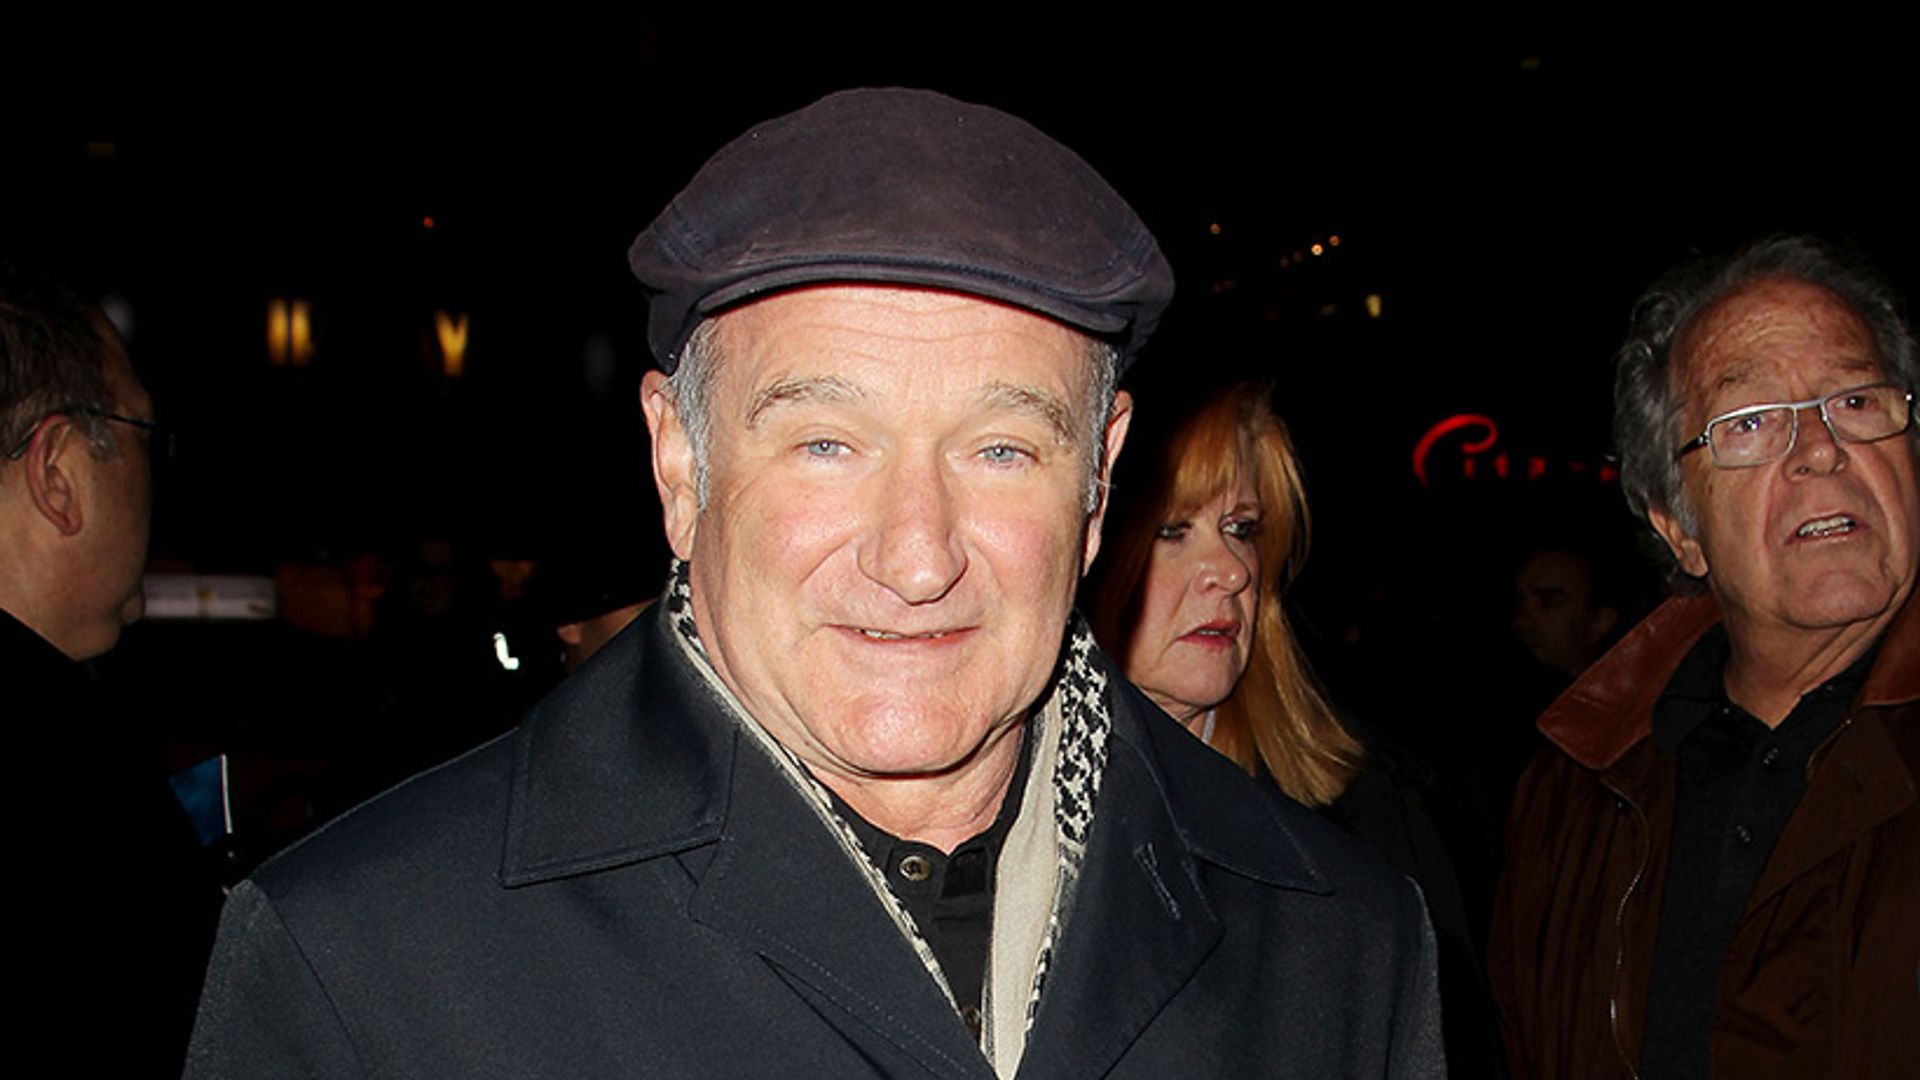 Robin Williams' wife details actor's final months: 'it was not a weakness in his heart, spirit, or character.'